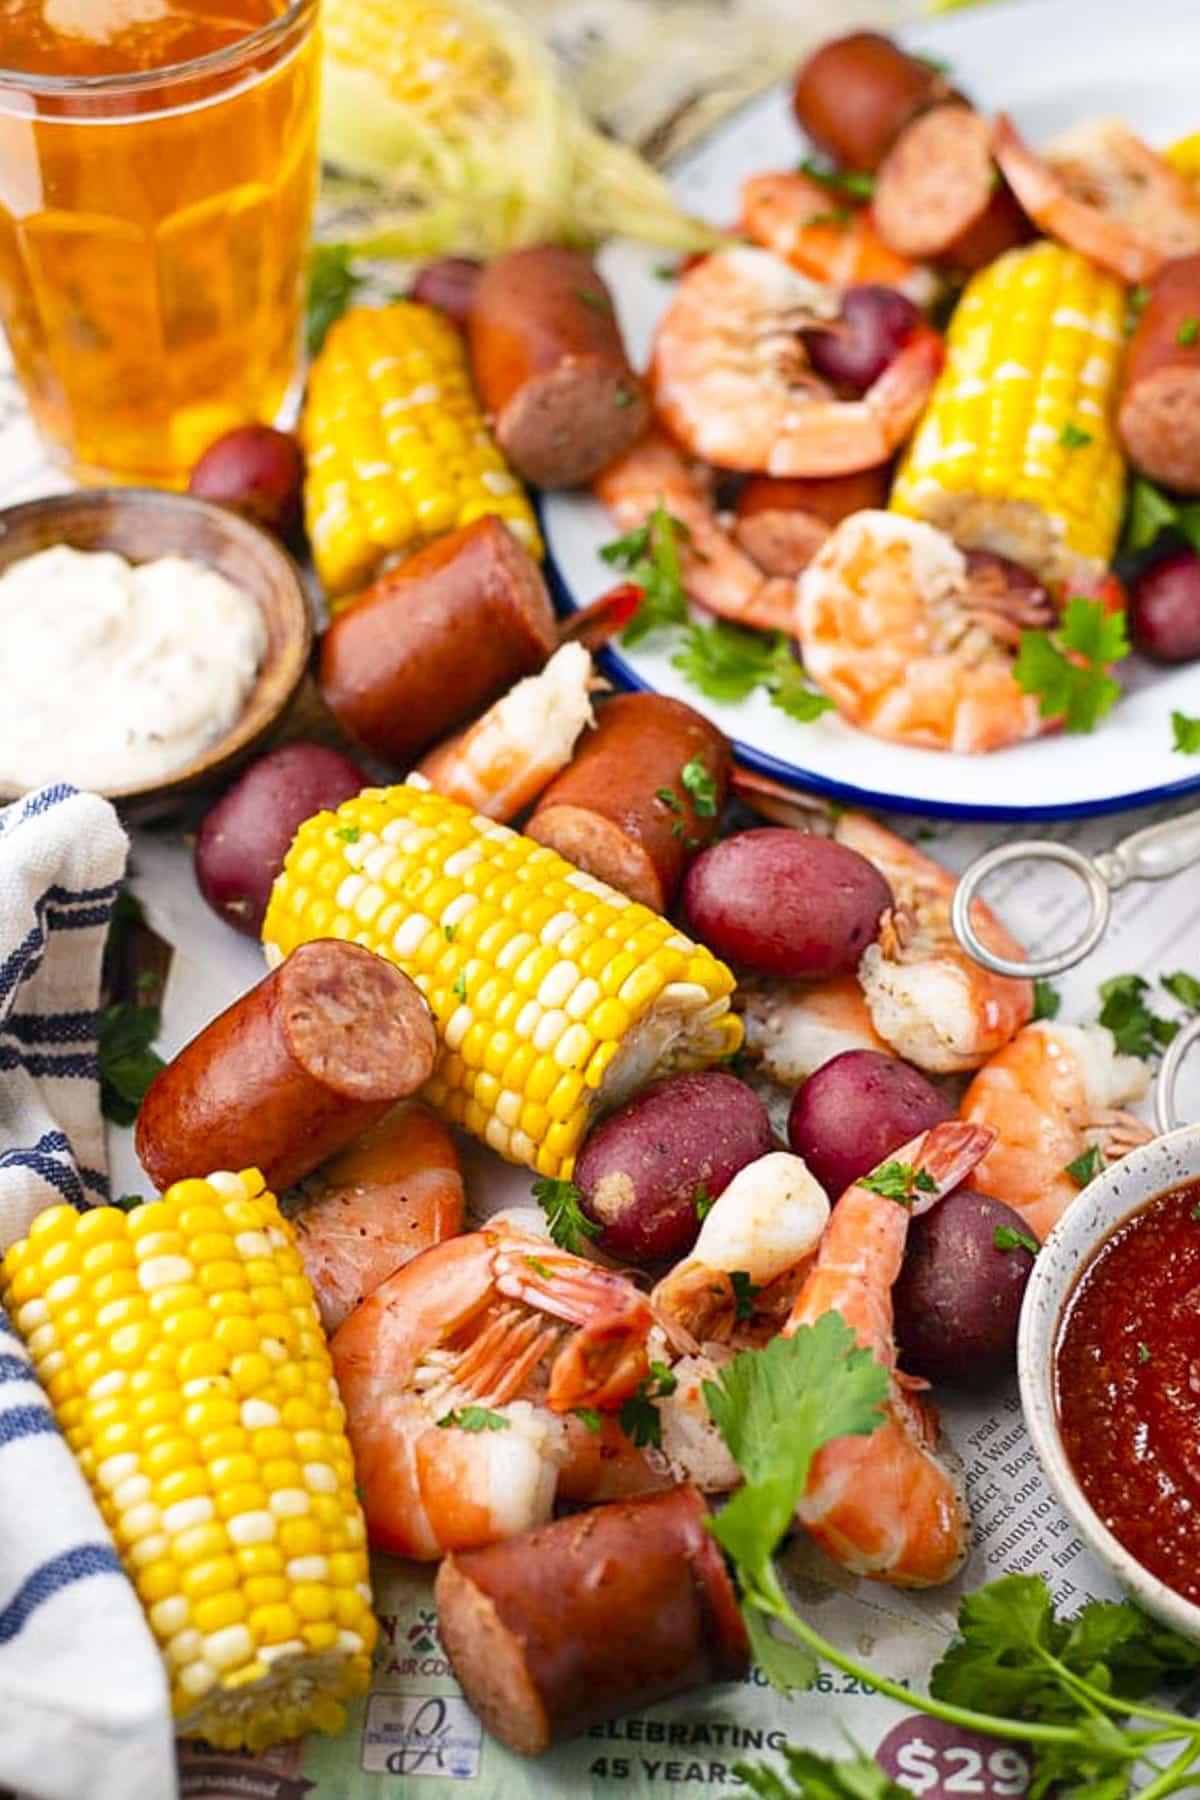 Shrimp boil recipe spread on a picnic table lined with newspapers.